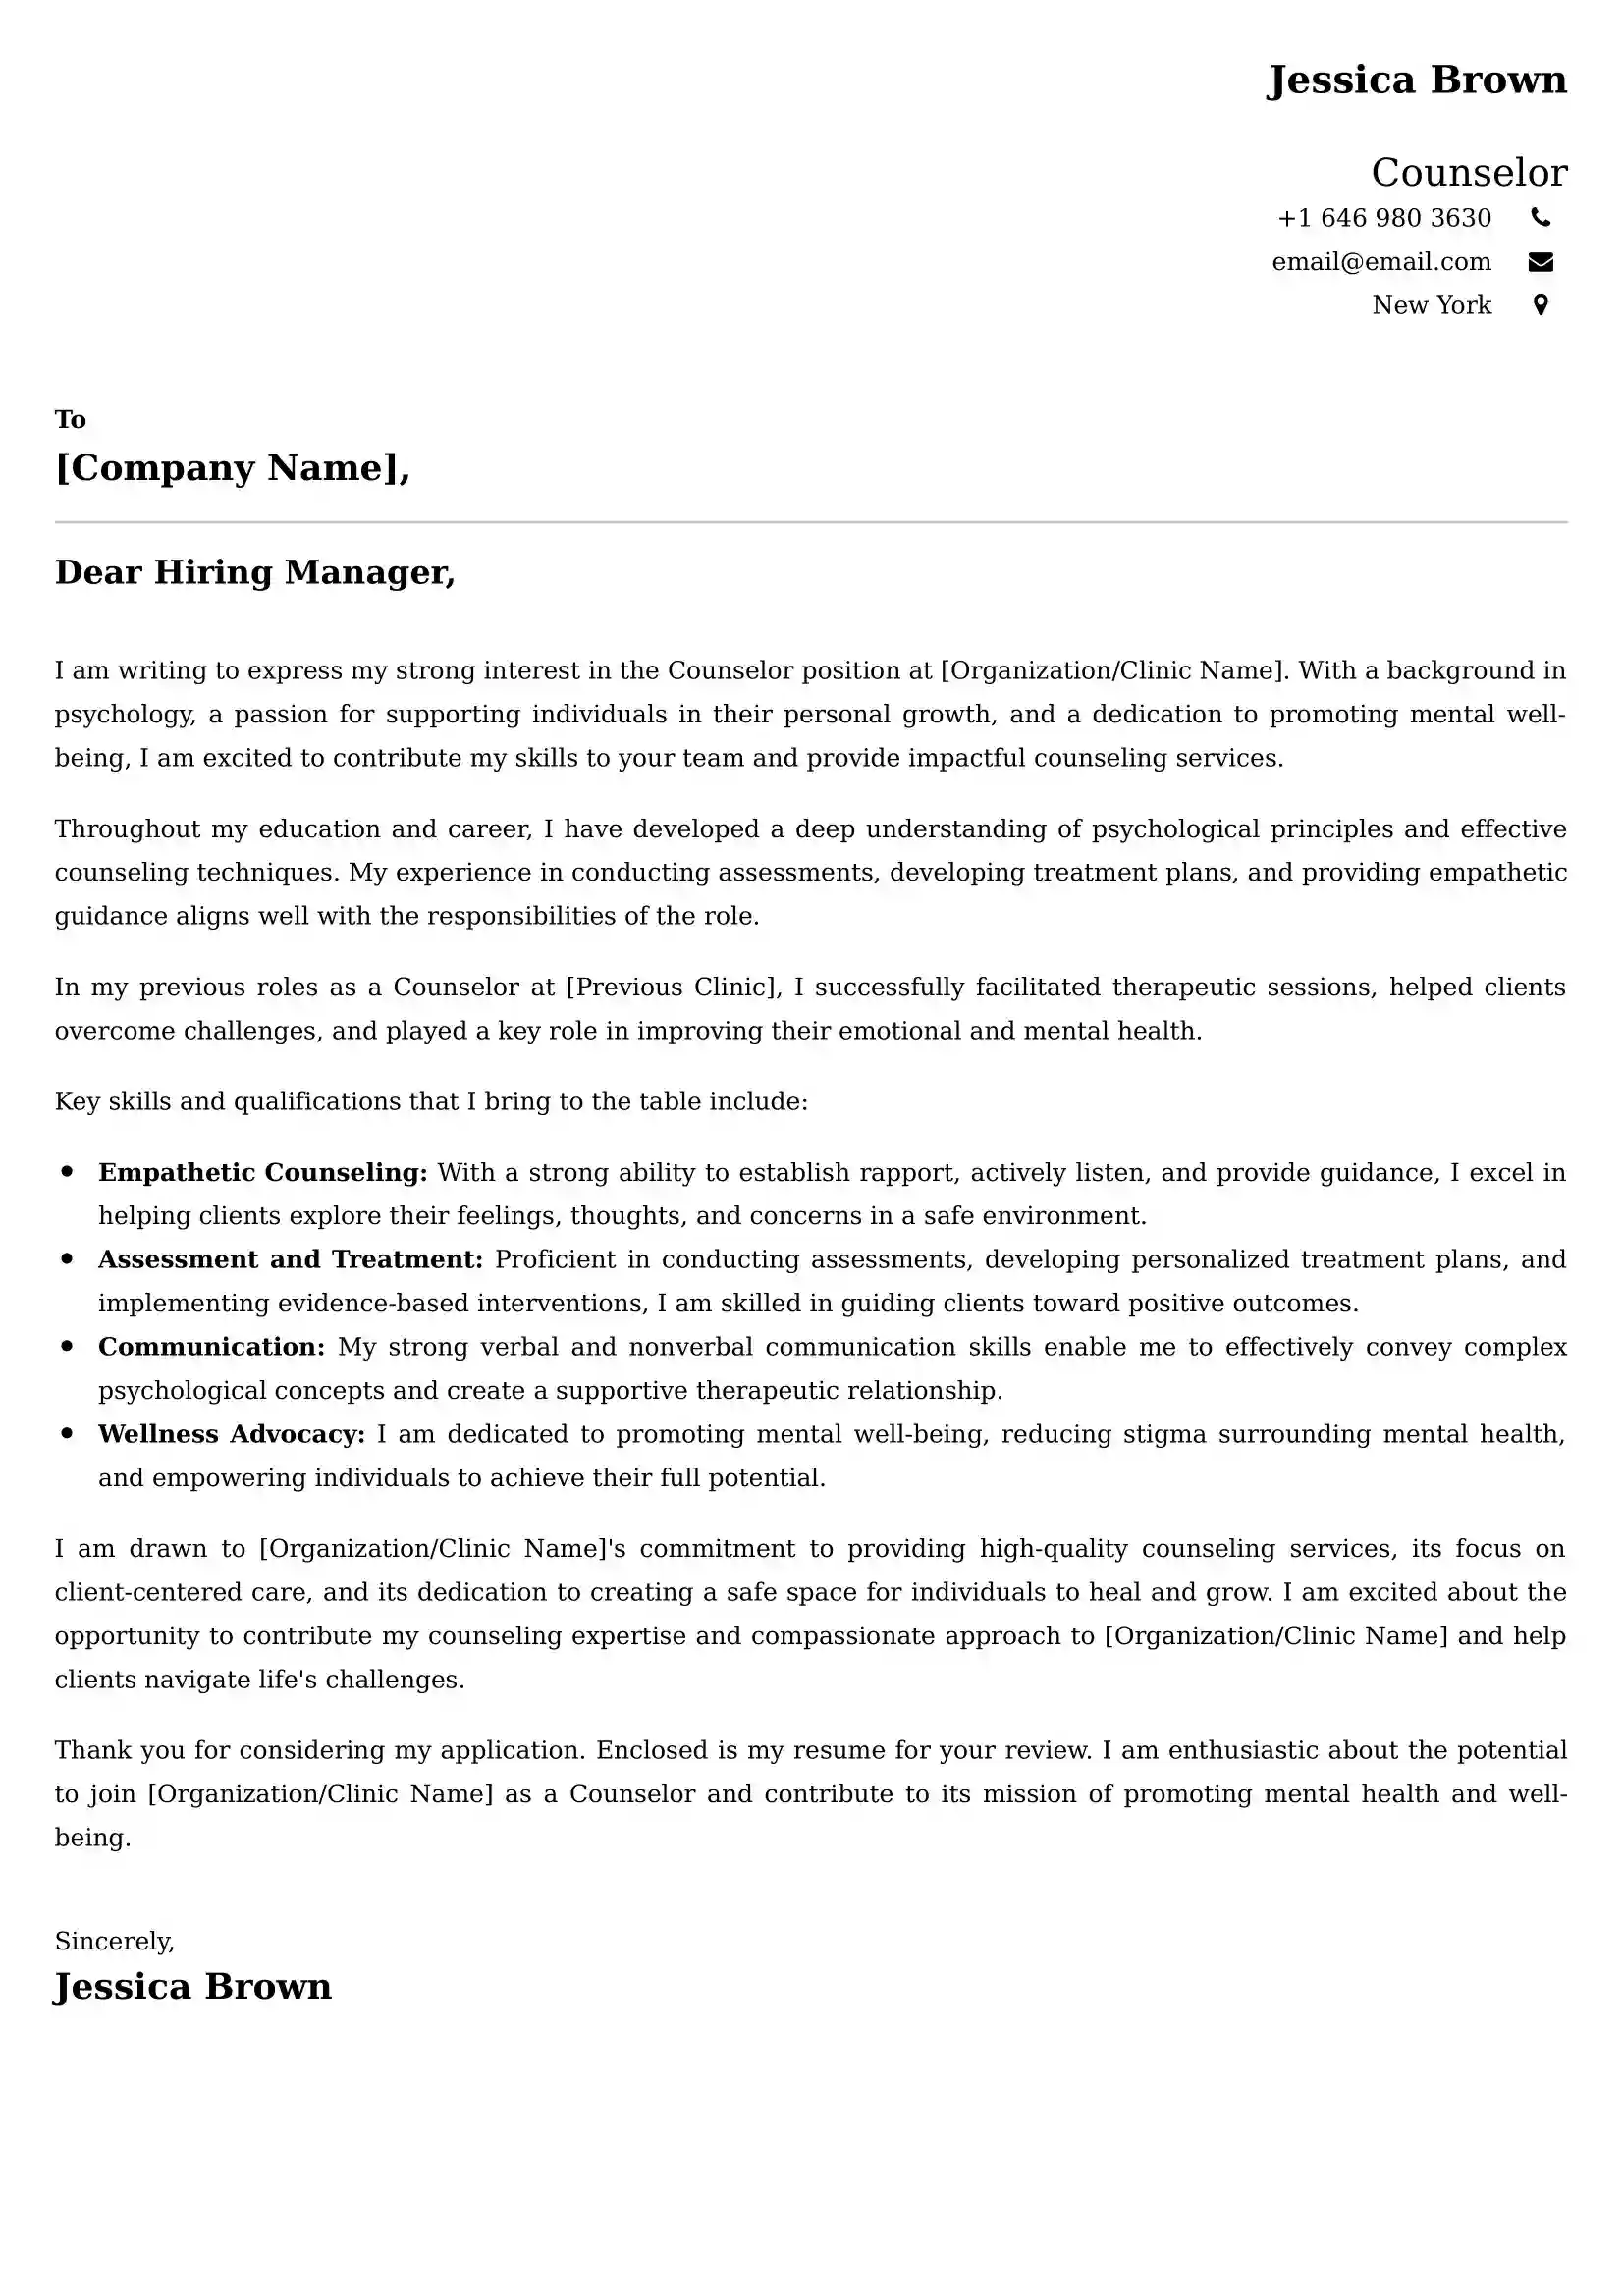 Counselor Cover Letter Examples -Latest Brazilian Templates